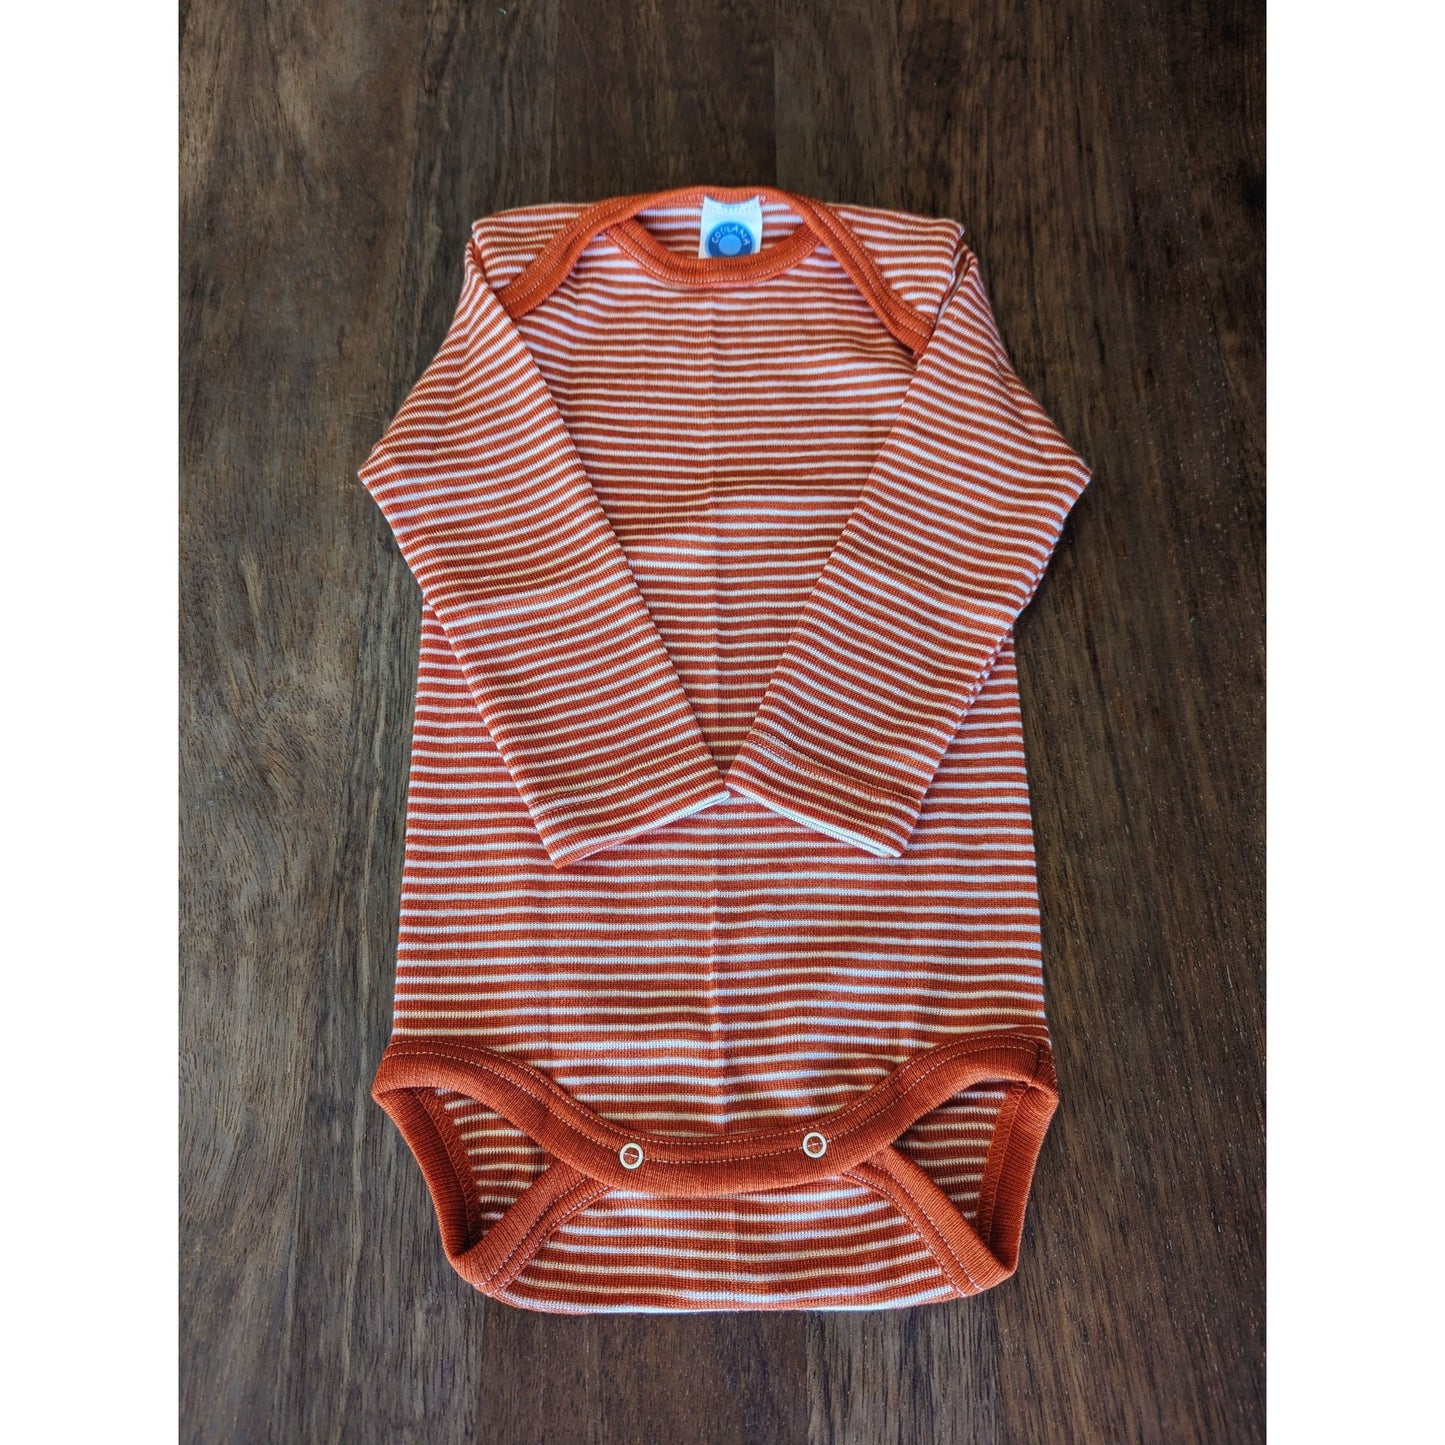 Cosilana - Organic Wool Silk - Baby Onesies (10 colors and stripes!) - Nature's Wild Child